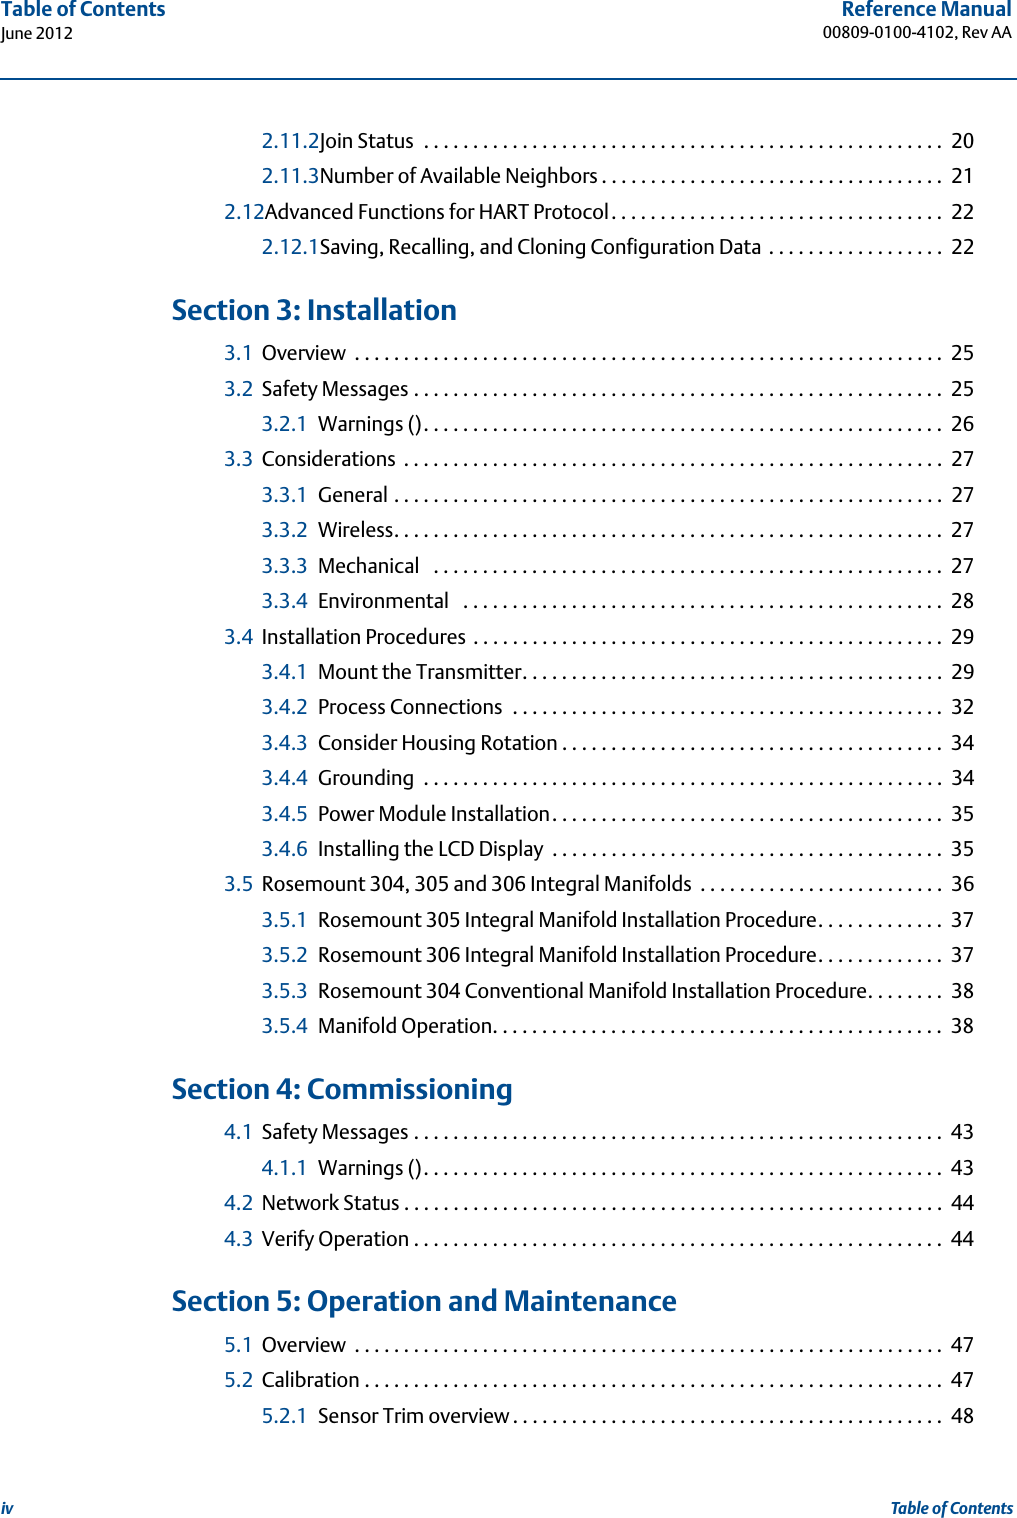 ivReference Manual00809-0100-4102, Rev AATable of ContentsJune 2012Table of Contents2.11.2Join Status  . . . . . . . . . . . . . . . . . . . . . . . . . . . . . . . . . . . . . . . . . . . . . . . . . . . . .  202.11.3Number of Available Neighbors . . . . . . . . . . . . . . . . . . . . . . . . . . . . . . . . . . .  212.12Advanced Functions for HART Protocol. . . . . . . . . . . . . . . . . . . . . . . . . . . . . . . . . .  222.12.1Saving, Recalling, and Cloning Configuration Data  . . . . . . . . . . . . . . . . . .  22 3Section 3: Installation3.1 Overview  . . . . . . . . . . . . . . . . . . . . . . . . . . . . . . . . . . . . . . . . . . . . . . . . . . . . . . . . . . . . 253.2 Safety Messages . . . . . . . . . . . . . . . . . . . . . . . . . . . . . . . . . . . . . . . . . . . . . . . . . . . . . .  253.2.1 Warnings (). . . . . . . . . . . . . . . . . . . . . . . . . . . . . . . . . . . . . . . . . . . . . . . . . . . . .  263.3 Considerations  . . . . . . . . . . . . . . . . . . . . . . . . . . . . . . . . . . . . . . . . . . . . . . . . . . . . . . .  273.3.1 General . . . . . . . . . . . . . . . . . . . . . . . . . . . . . . . . . . . . . . . . . . . . . . . . . . . . . . . .  273.3.2 Wireless. . . . . . . . . . . . . . . . . . . . . . . . . . . . . . . . . . . . . . . . . . . . . . . . . . . . . . . .  273.3.3 Mechanical   . . . . . . . . . . . . . . . . . . . . . . . . . . . . . . . . . . . . . . . . . . . . . . . . . . . .  273.3.4 Environmental   . . . . . . . . . . . . . . . . . . . . . . . . . . . . . . . . . . . . . . . . . . . . . . . . .  283.4 Installation Procedures . . . . . . . . . . . . . . . . . . . . . . . . . . . . . . . . . . . . . . . . . . . . . . . .  293.4.1 Mount the Transmitter. . . . . . . . . . . . . . . . . . . . . . . . . . . . . . . . . . . . . . . . . . .  293.4.2 Process Connections  . . . . . . . . . . . . . . . . . . . . . . . . . . . . . . . . . . . . . . . . . . . .  323.4.3 Consider Housing Rotation . . . . . . . . . . . . . . . . . . . . . . . . . . . . . . . . . . . . . . .  343.4.4 Grounding  . . . . . . . . . . . . . . . . . . . . . . . . . . . . . . . . . . . . . . . . . . . . . . . . . . . . .  343.4.5 Power Module Installation. . . . . . . . . . . . . . . . . . . . . . . . . . . . . . . . . . . . . . . .  353.4.6 Installing the LCD Display  . . . . . . . . . . . . . . . . . . . . . . . . . . . . . . . . . . . . . . . .  353.5 Rosemount 304, 305 and 306 Integral Manifolds  . . . . . . . . . . . . . . . . . . . . . . . . .  363.5.1 Rosemount 305 Integral Manifold Installation Procedure. . . . . . . . . . . . .  373.5.2 Rosemount 306 Integral Manifold Installation Procedure. . . . . . . . . . . . .  373.5.3 Rosemount 304 Conventional Manifold Installation Procedure. . . . . . . .  383.5.4 Manifold Operation. . . . . . . . . . . . . . . . . . . . . . . . . . . . . . . . . . . . . . . . . . . . . .  38 4Section 4: Commissioning4.1 Safety Messages . . . . . . . . . . . . . . . . . . . . . . . . . . . . . . . . . . . . . . . . . . . . . . . . . . . . . .  434.1.1 Warnings (). . . . . . . . . . . . . . . . . . . . . . . . . . . . . . . . . . . . . . . . . . . . . . . . . . . . .  434.2 Network Status . . . . . . . . . . . . . . . . . . . . . . . . . . . . . . . . . . . . . . . . . . . . . . . . . . . . . . .  444.3 Verify Operation . . . . . . . . . . . . . . . . . . . . . . . . . . . . . . . . . . . . . . . . . . . . . . . . . . . . . .  44 5Section 5: Operation and Maintenance5.1 Overview  . . . . . . . . . . . . . . . . . . . . . . . . . . . . . . . . . . . . . . . . . . . . . . . . . . . . . . . . . . . . 475.2 Calibration . . . . . . . . . . . . . . . . . . . . . . . . . . . . . . . . . . . . . . . . . . . . . . . . . . . . . . . . . . .  475.2.1 Sensor Trim overview . . . . . . . . . . . . . . . . . . . . . . . . . . . . . . . . . . . . . . . . . . . .  48